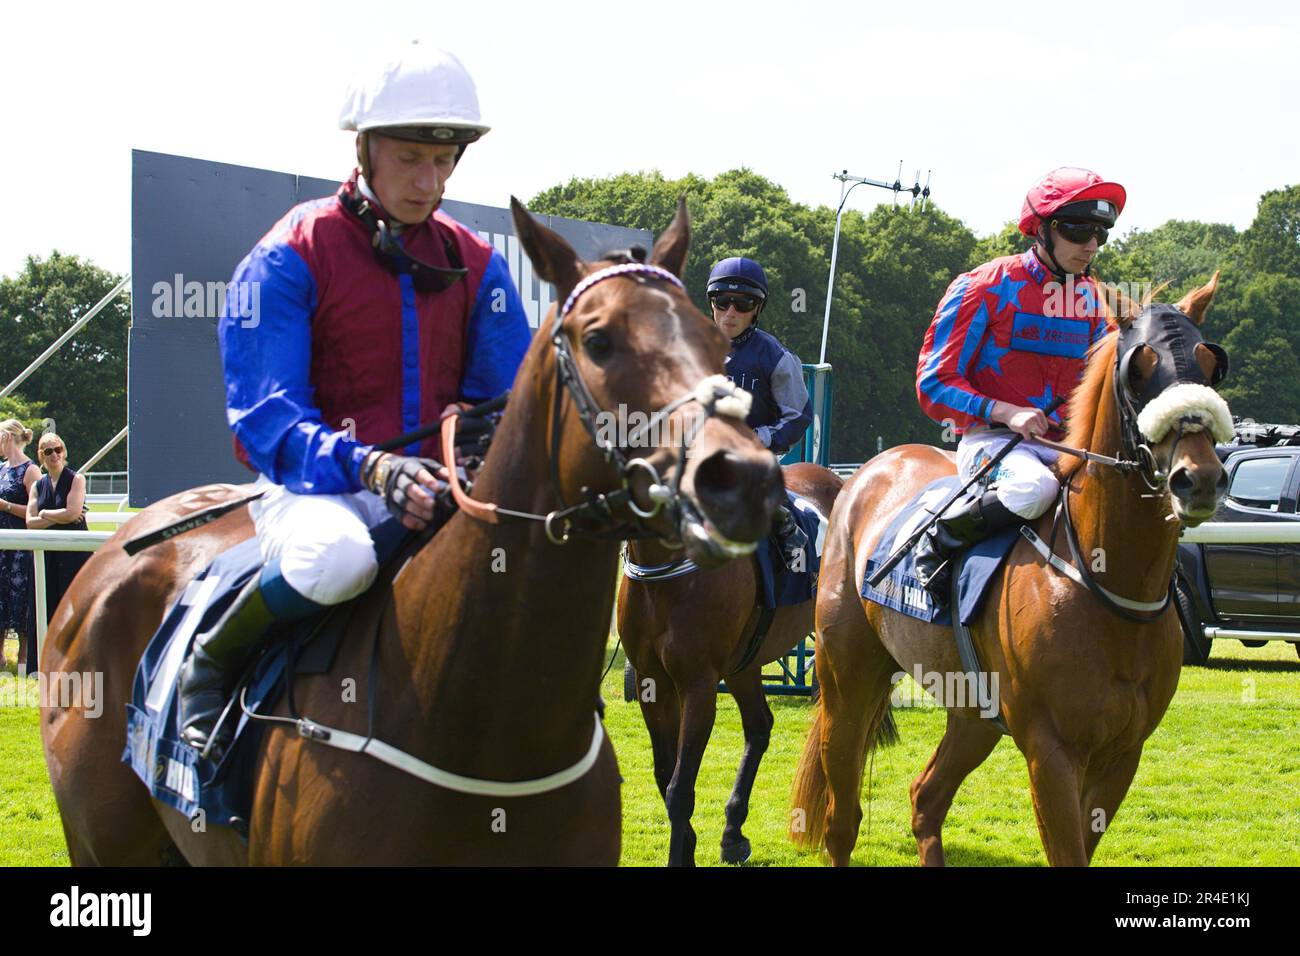 York, UK. 27th May 2023. Left to right: Jockeys Same James on Korker, Frederick Larson on Chipstead and James Sullivan on Reigning Profit before the start of a race at York Racecourse . Credit: Ed Clews/Alamy Live News. Stock Photo